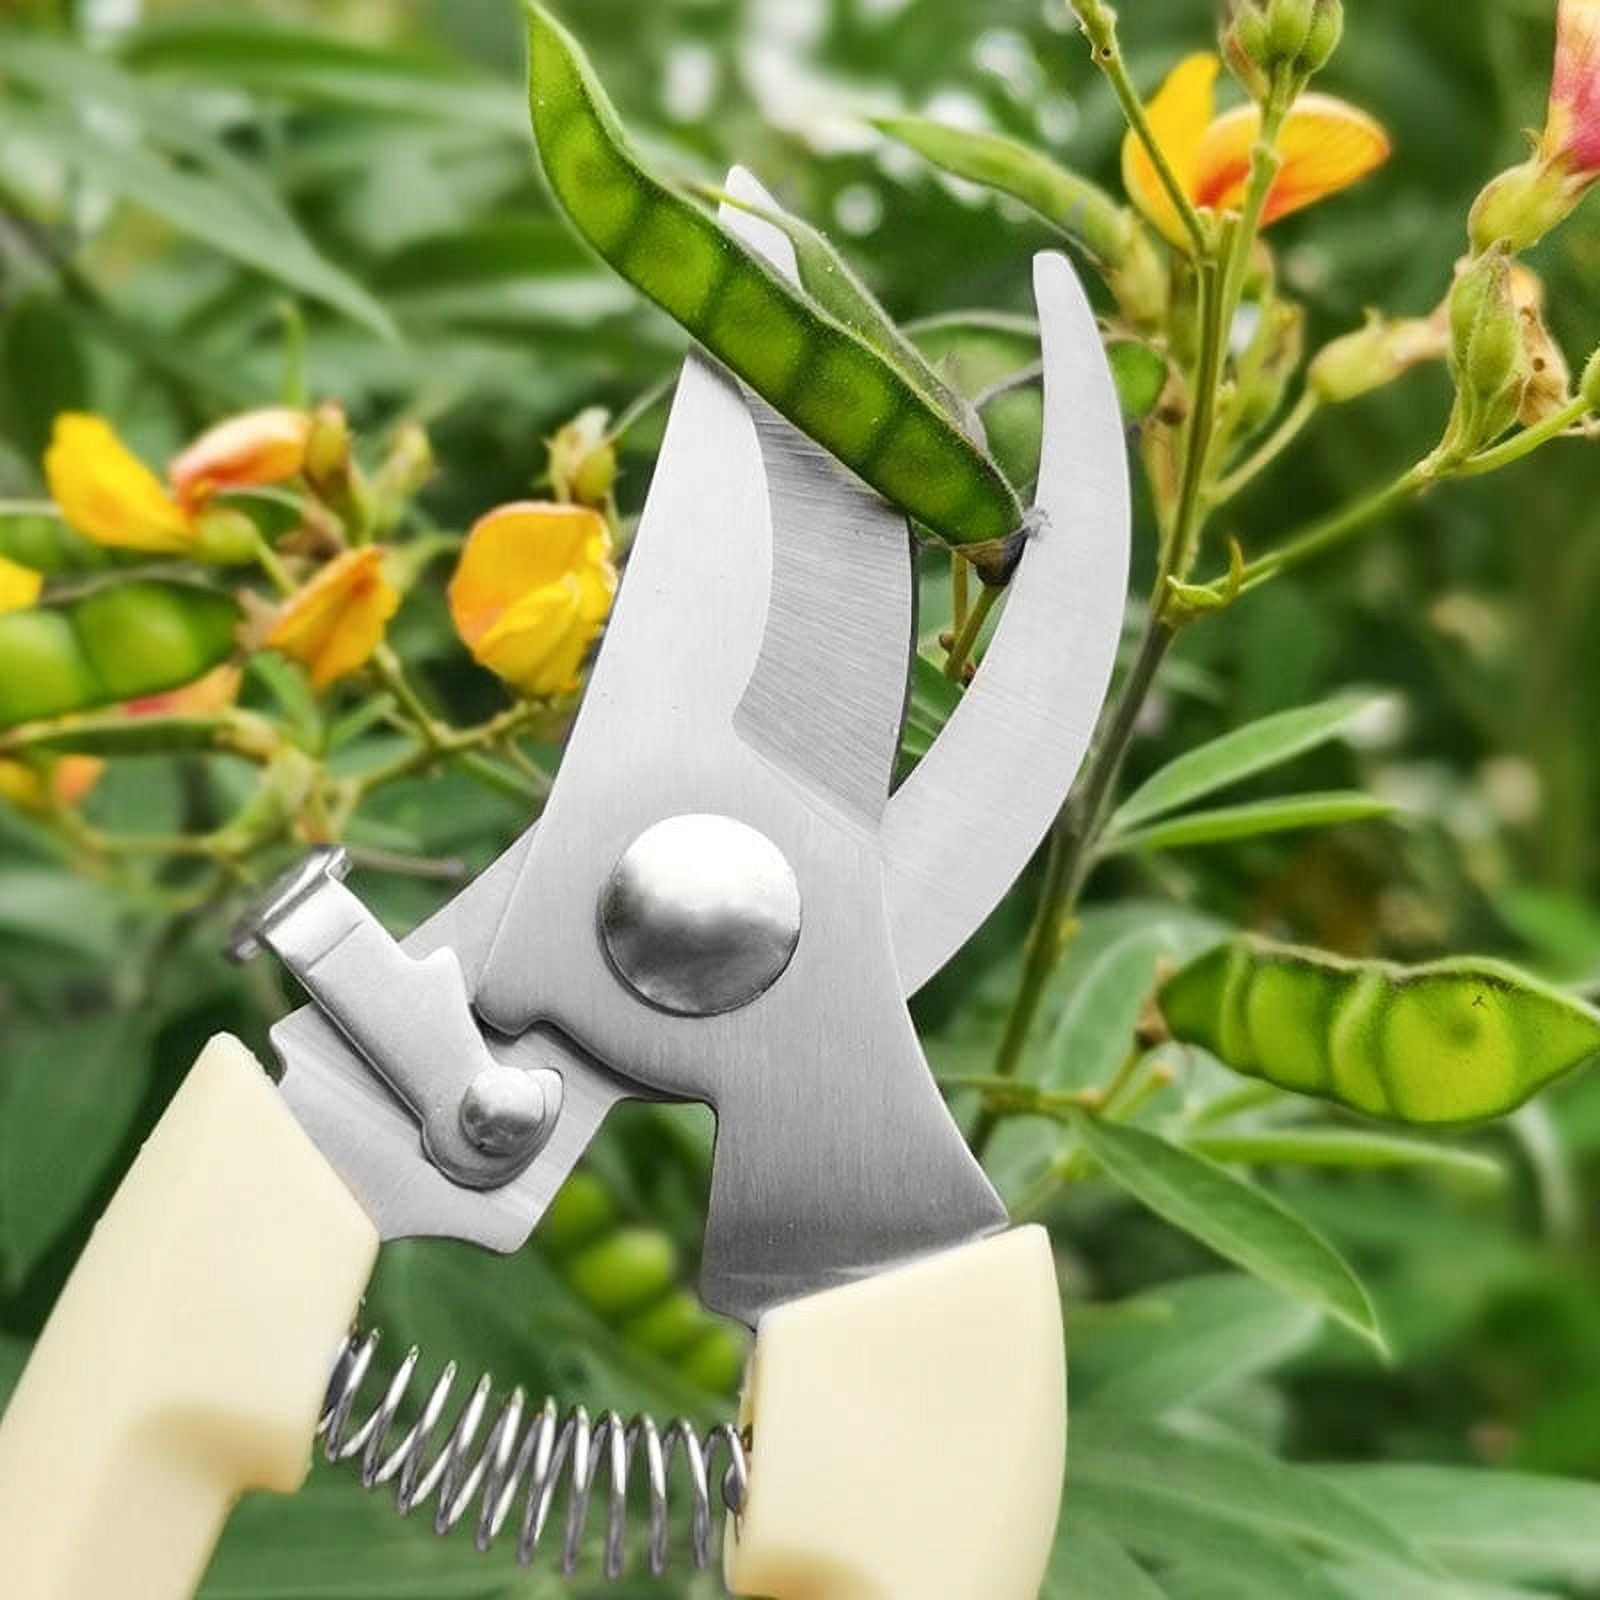 Davaon Pro Bypass Pruning Shears - Gardening Shears with Auto-Rotating  Handle and Ergonomic Soft-Grip, Achieve More Pruning with Less Effort,  Ideal for Arthriti…